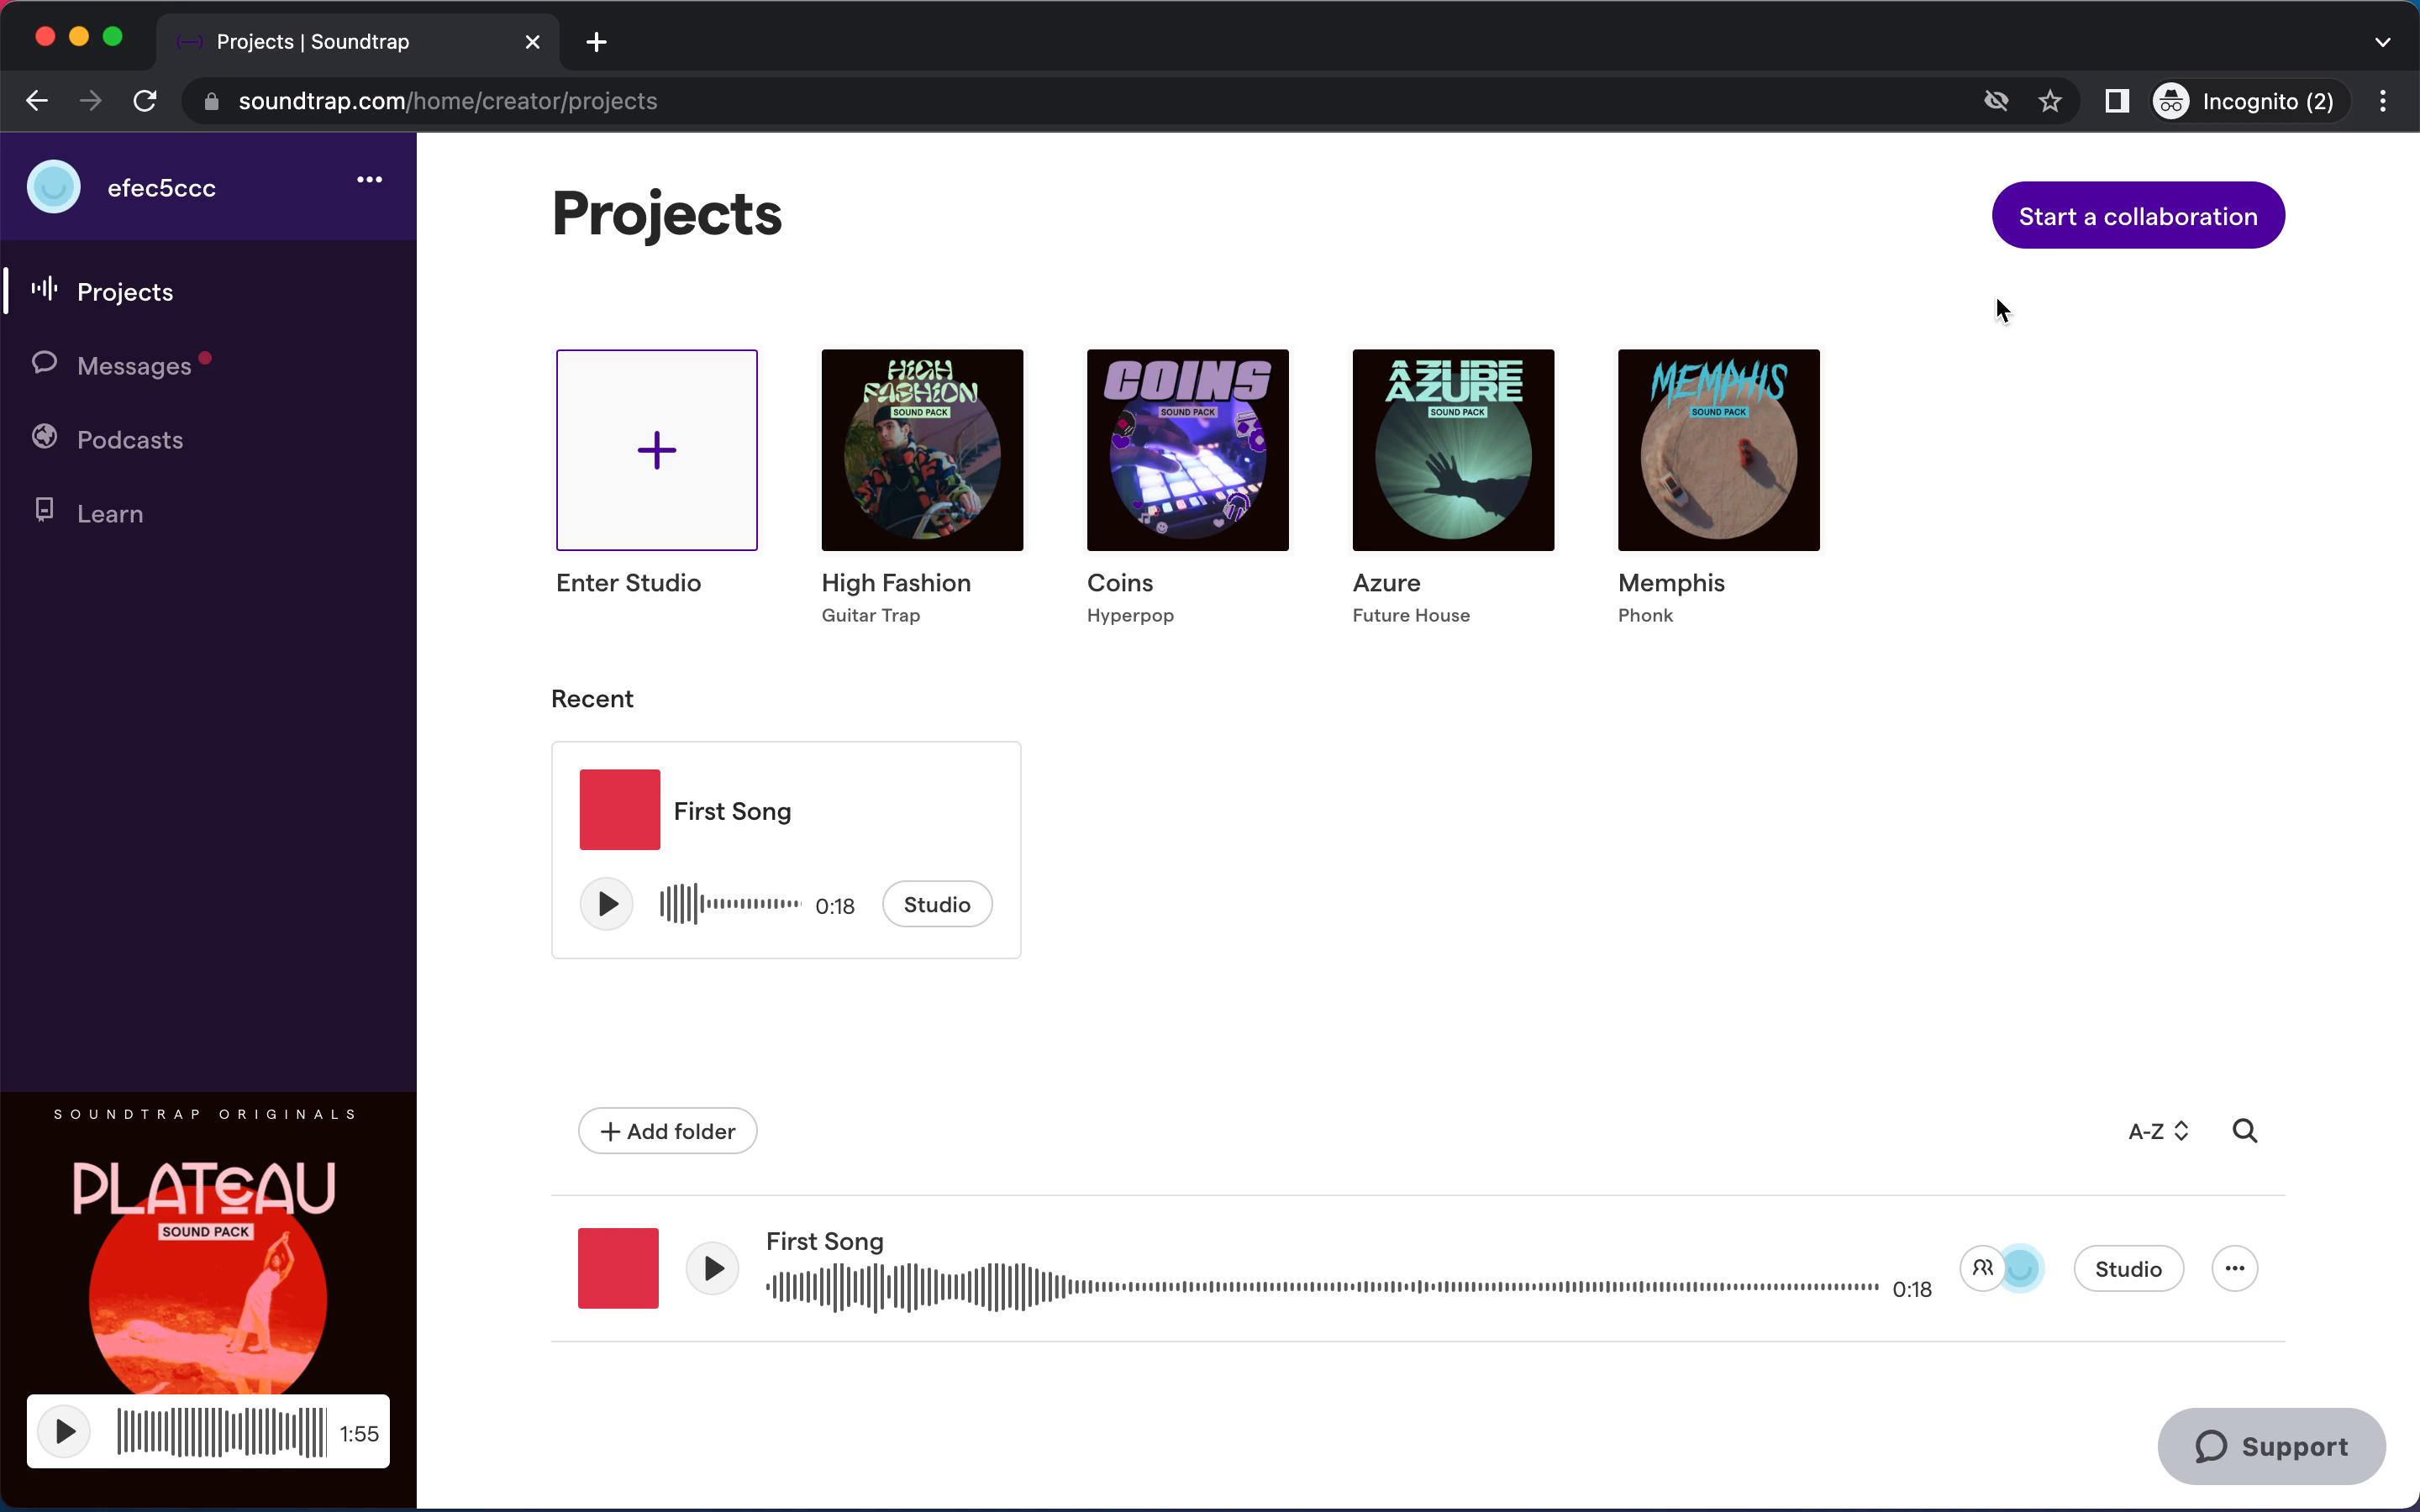 Screenshot of Inviting people on Soundtrap